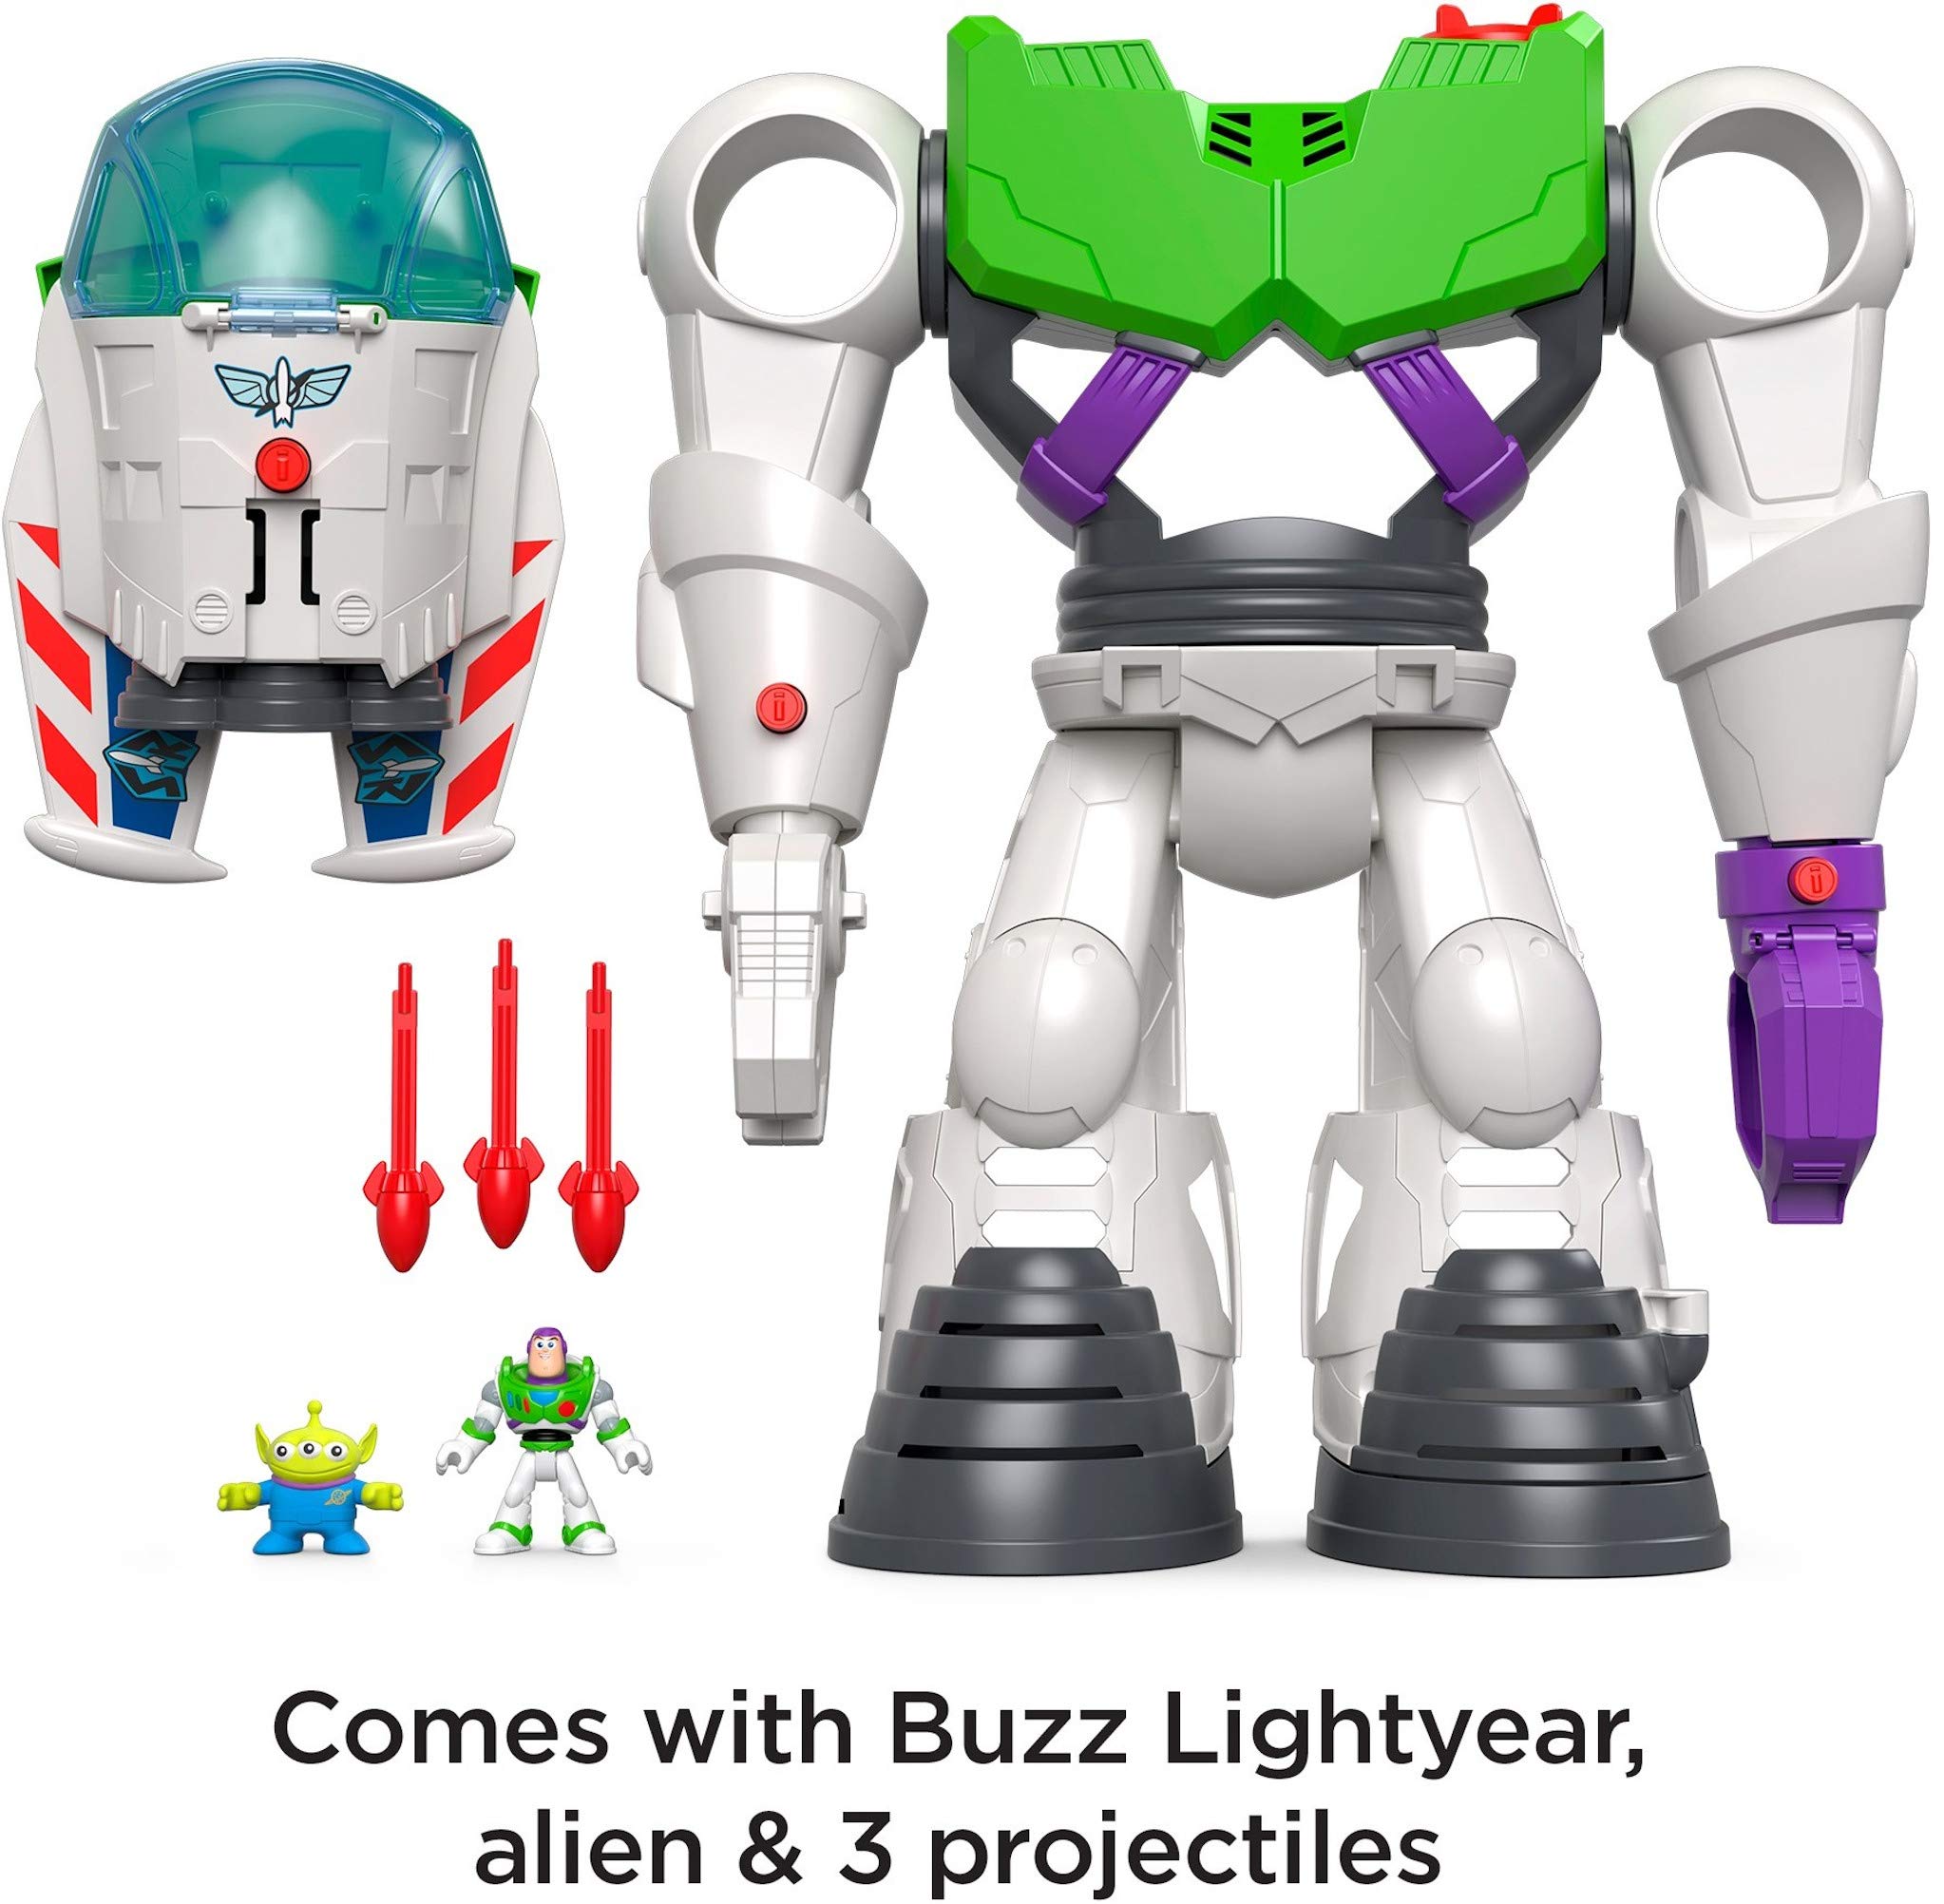 Disney Pixar Toy Story Playset Imaginext Buzz Lightyear Robot with Removable Spaceship & Figures for Pretend Play Ages 3+ Years